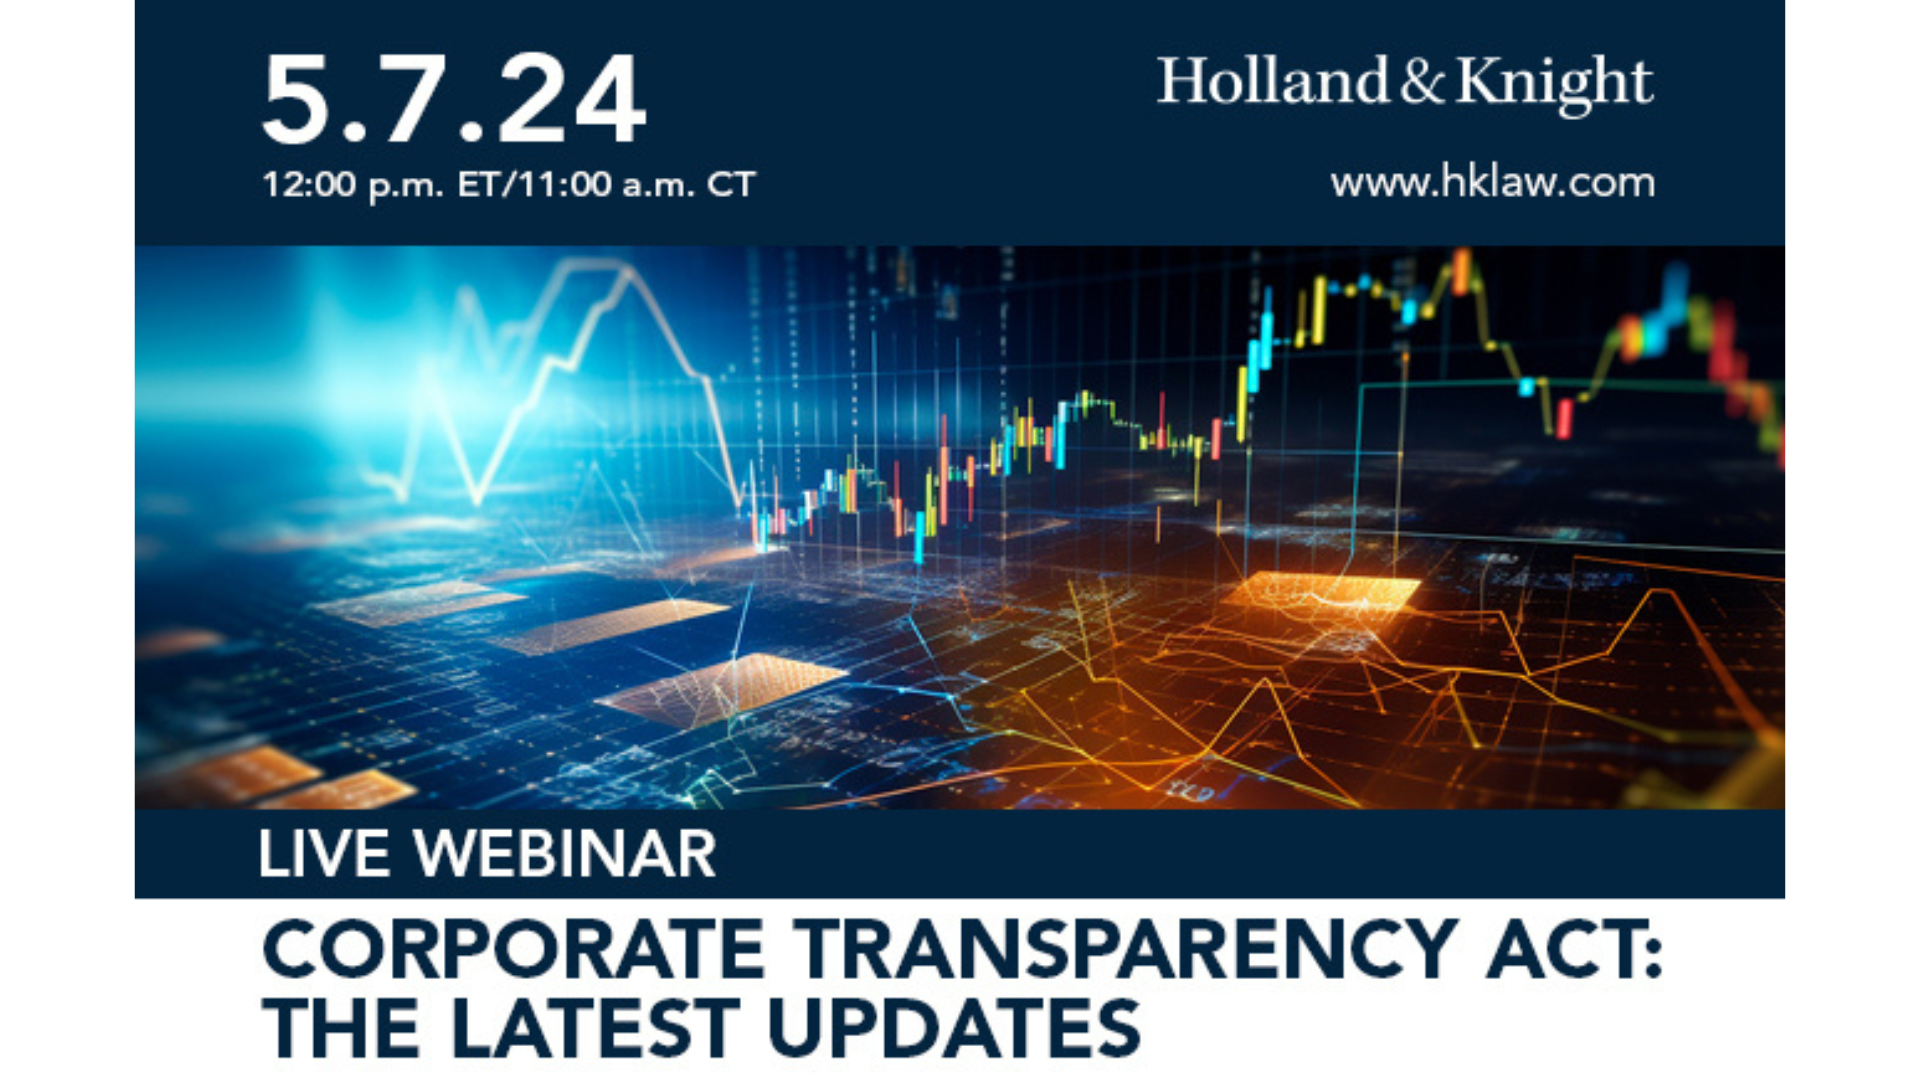 Corporate Transparency Act: The Latest Updates